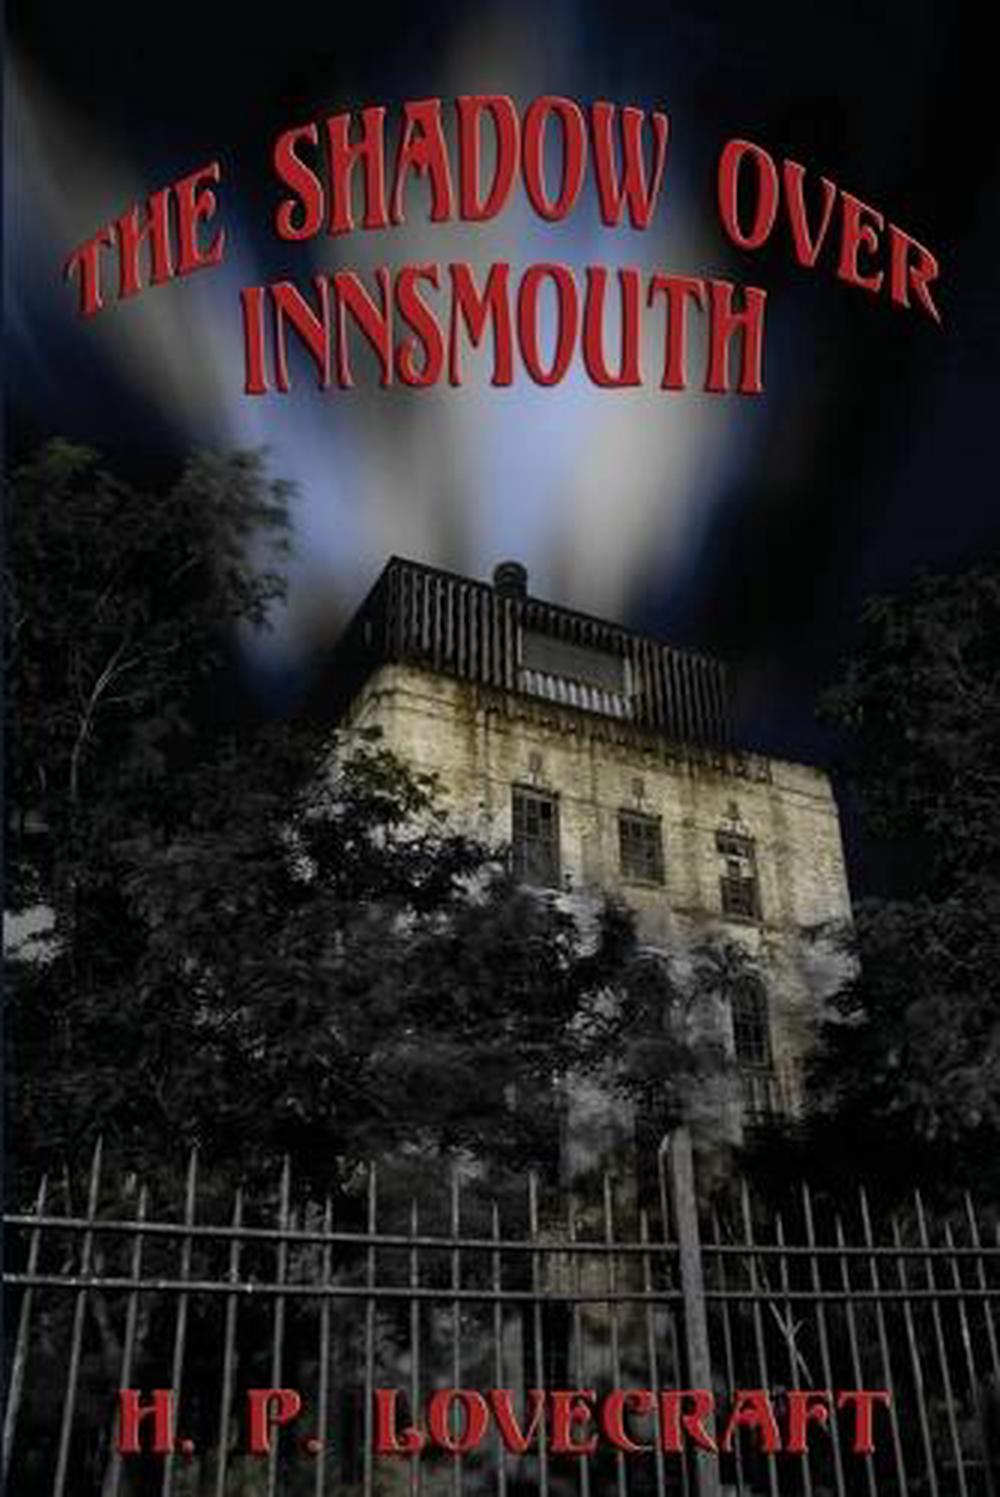 the shadow over innsmouth book